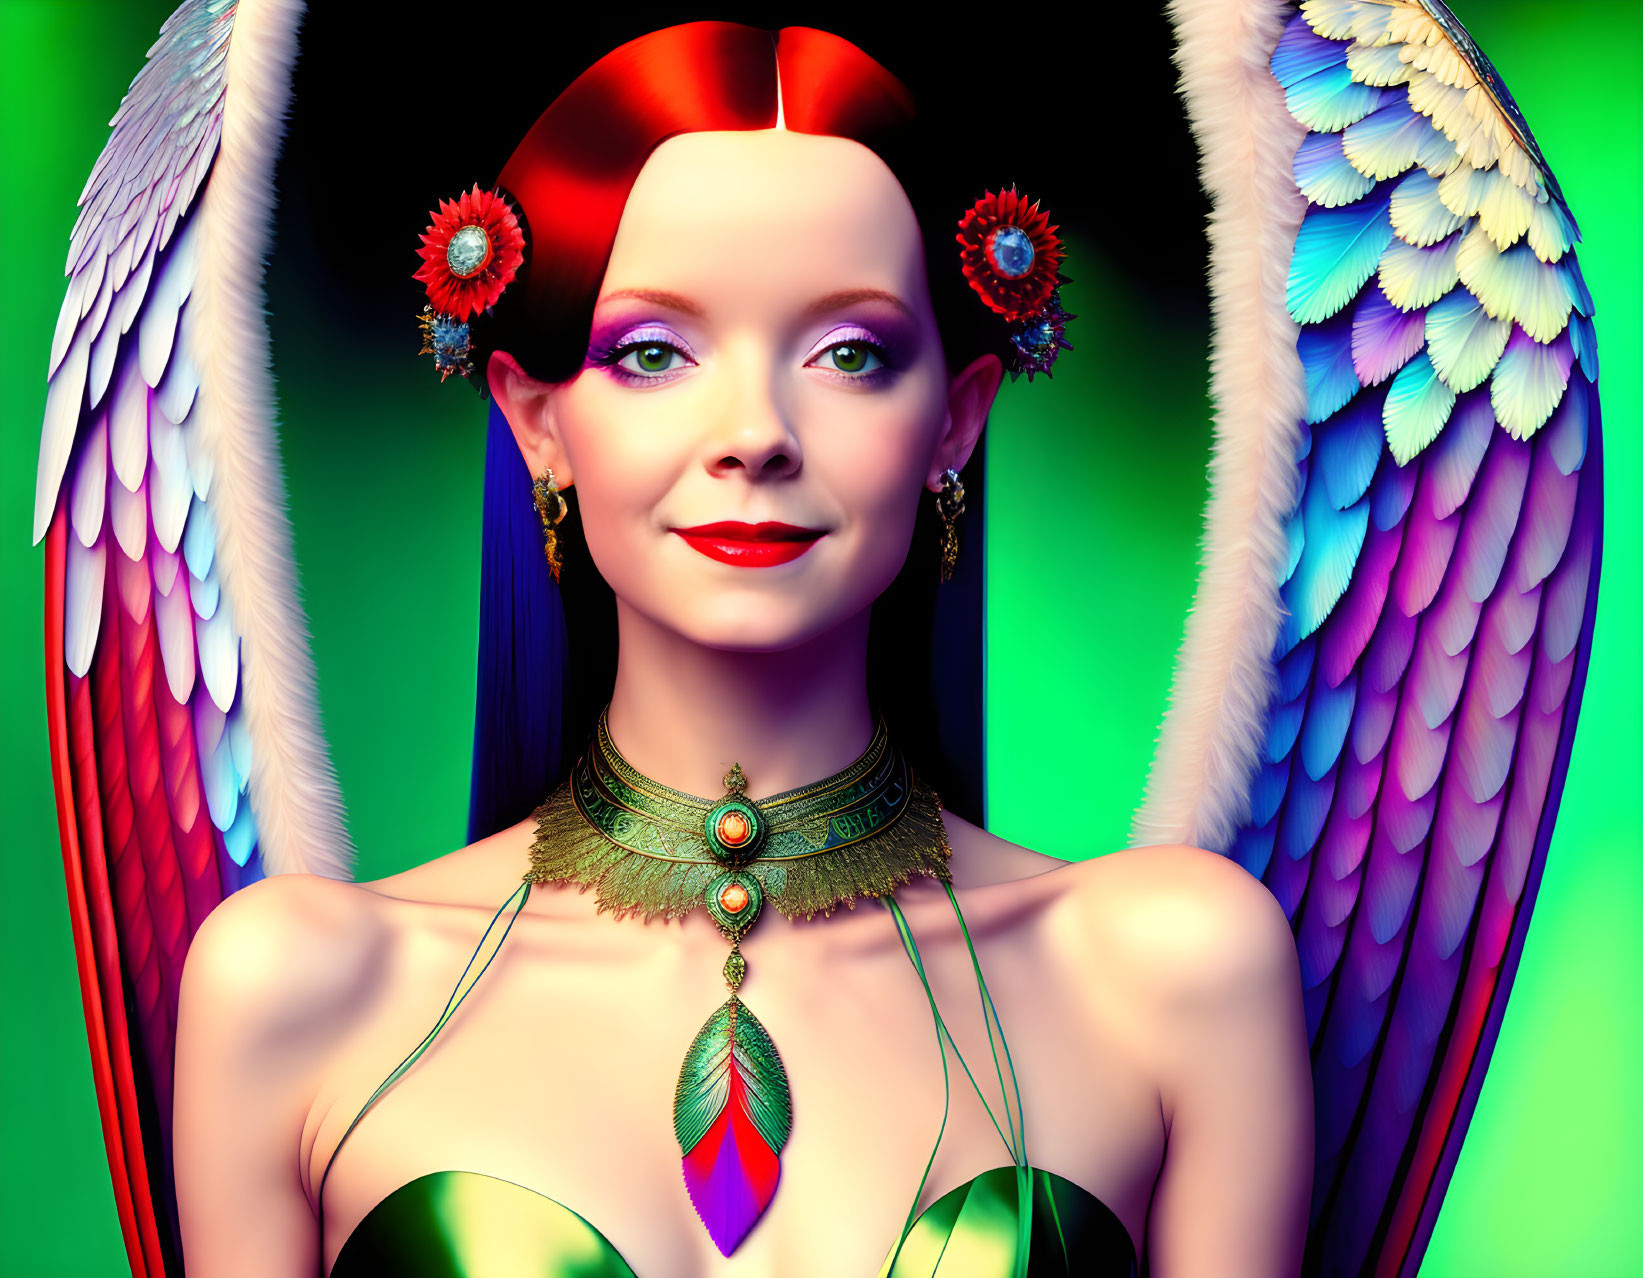 Vibrant digital artwork of a woman with angel wings and red hairband